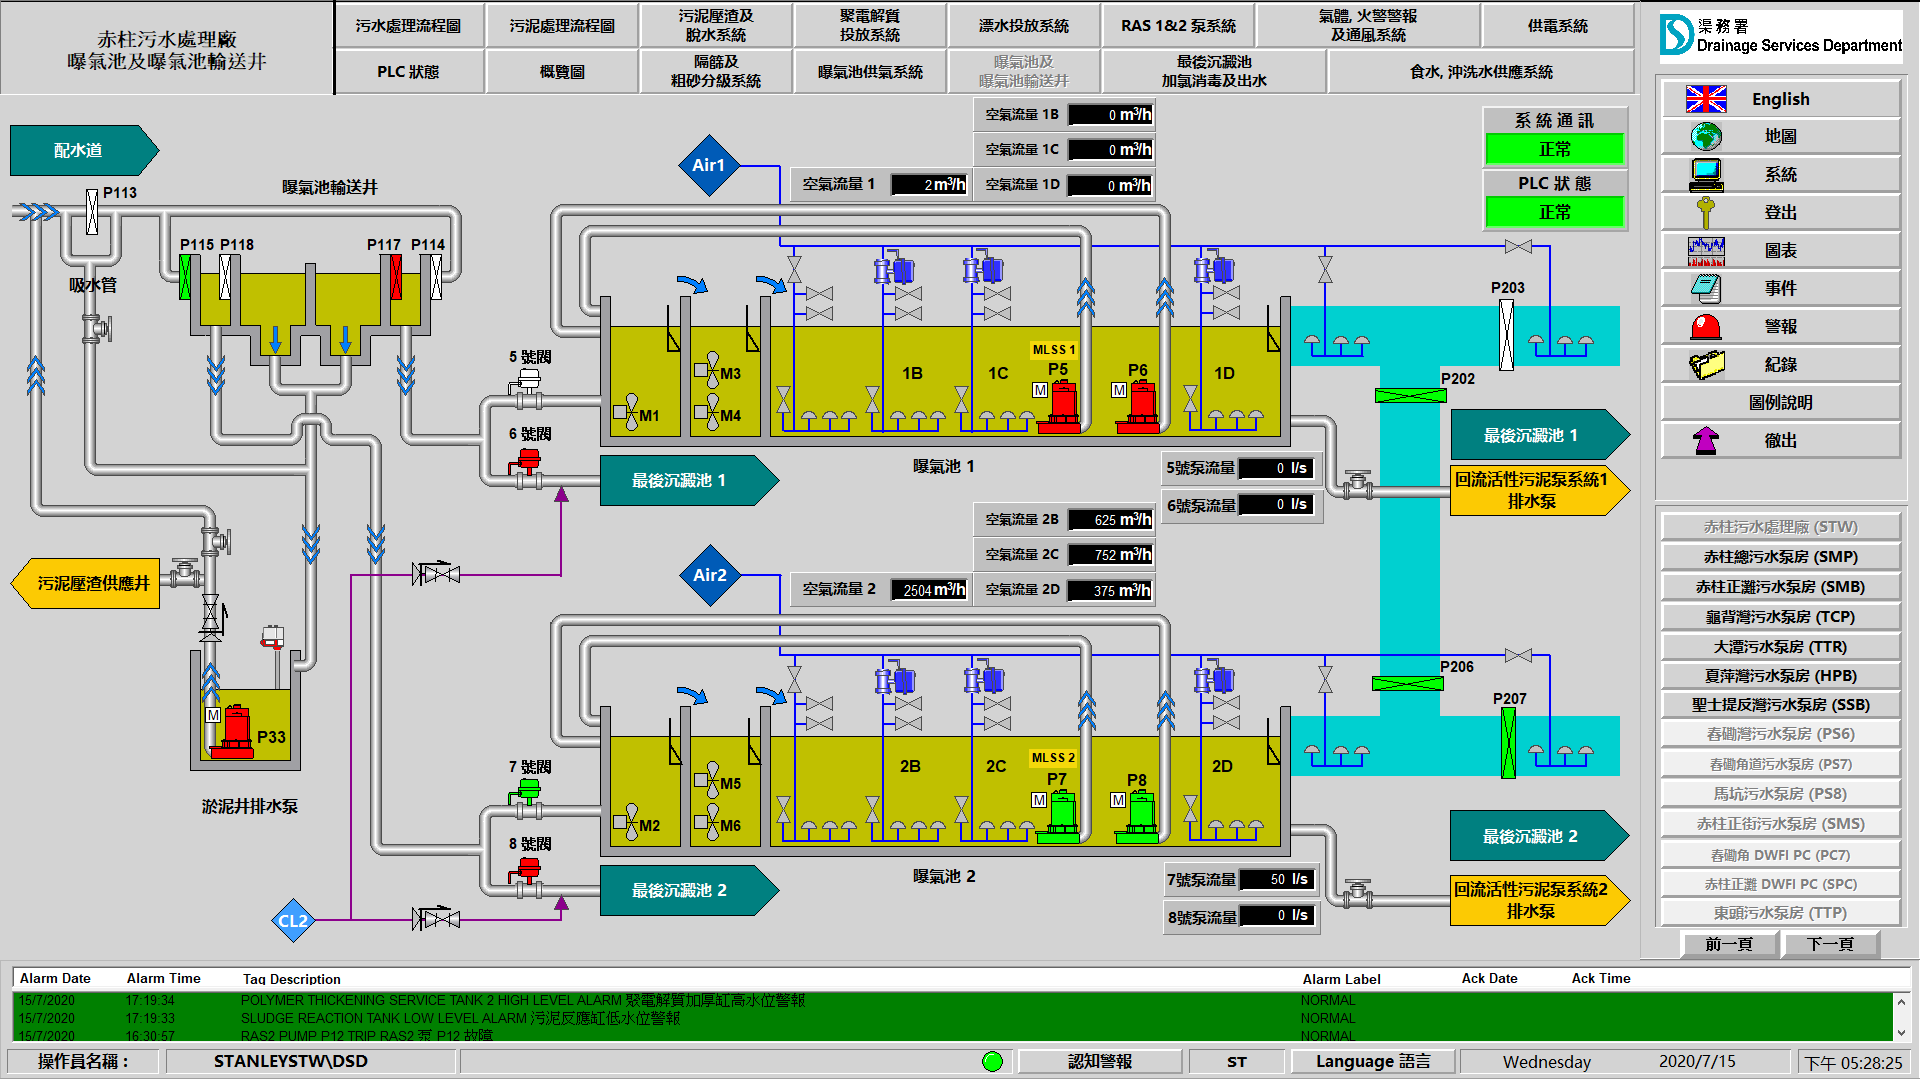 Aeration Tank & Feed Chamber screenshot from FactoryTalk View After Works in DSD Stanley STW (Typical)